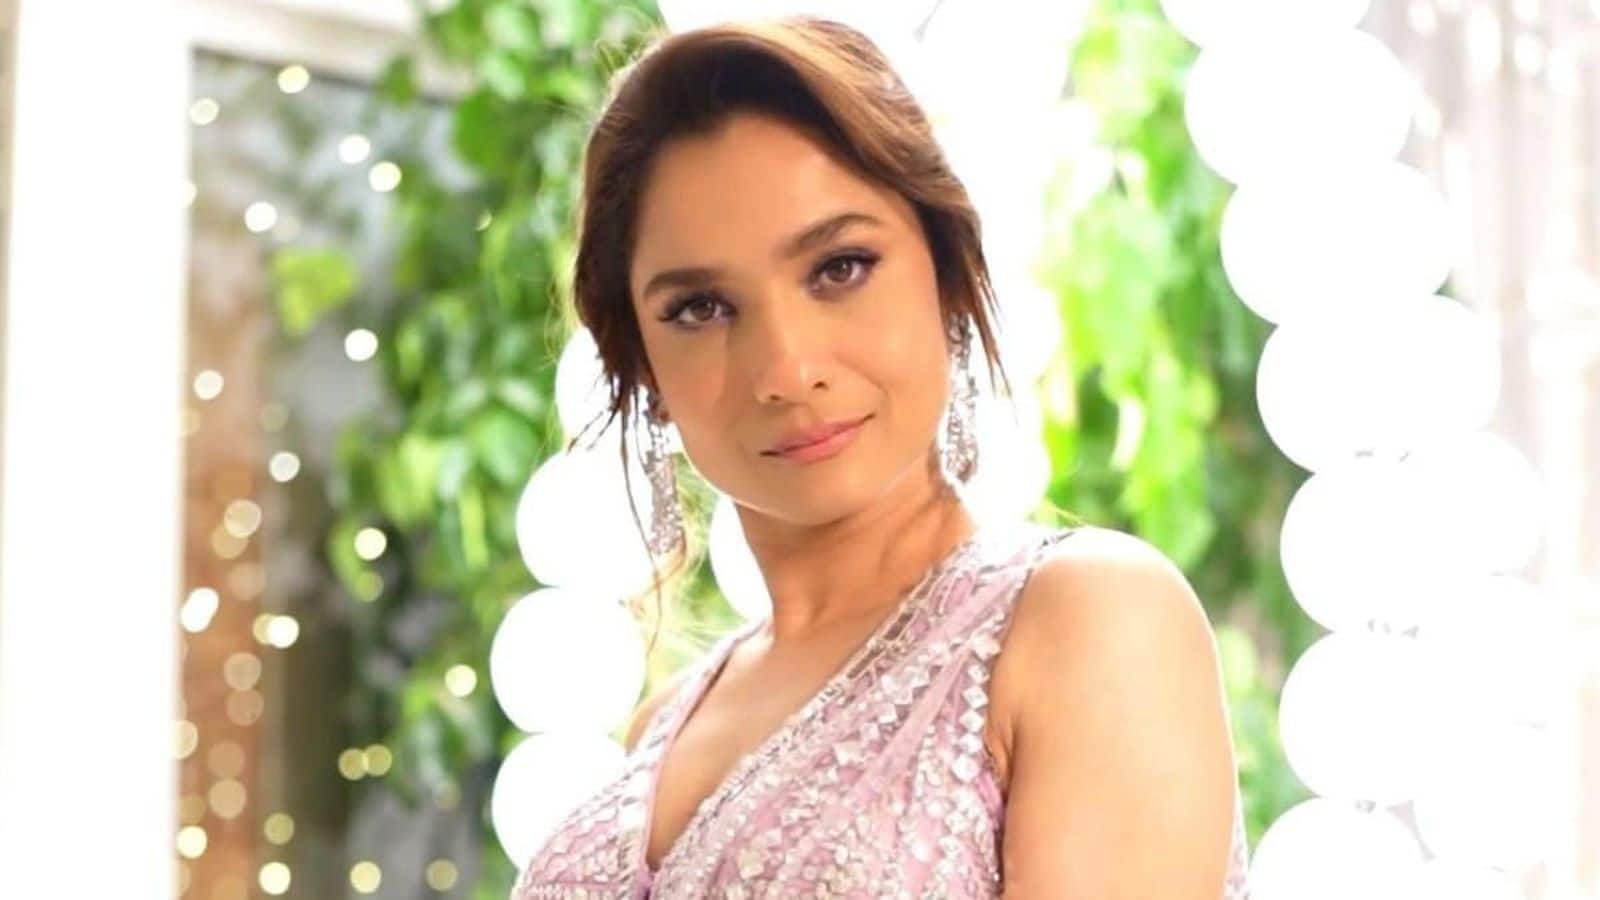 Ankita Lokhande declines role in 'Student of the Year 3'